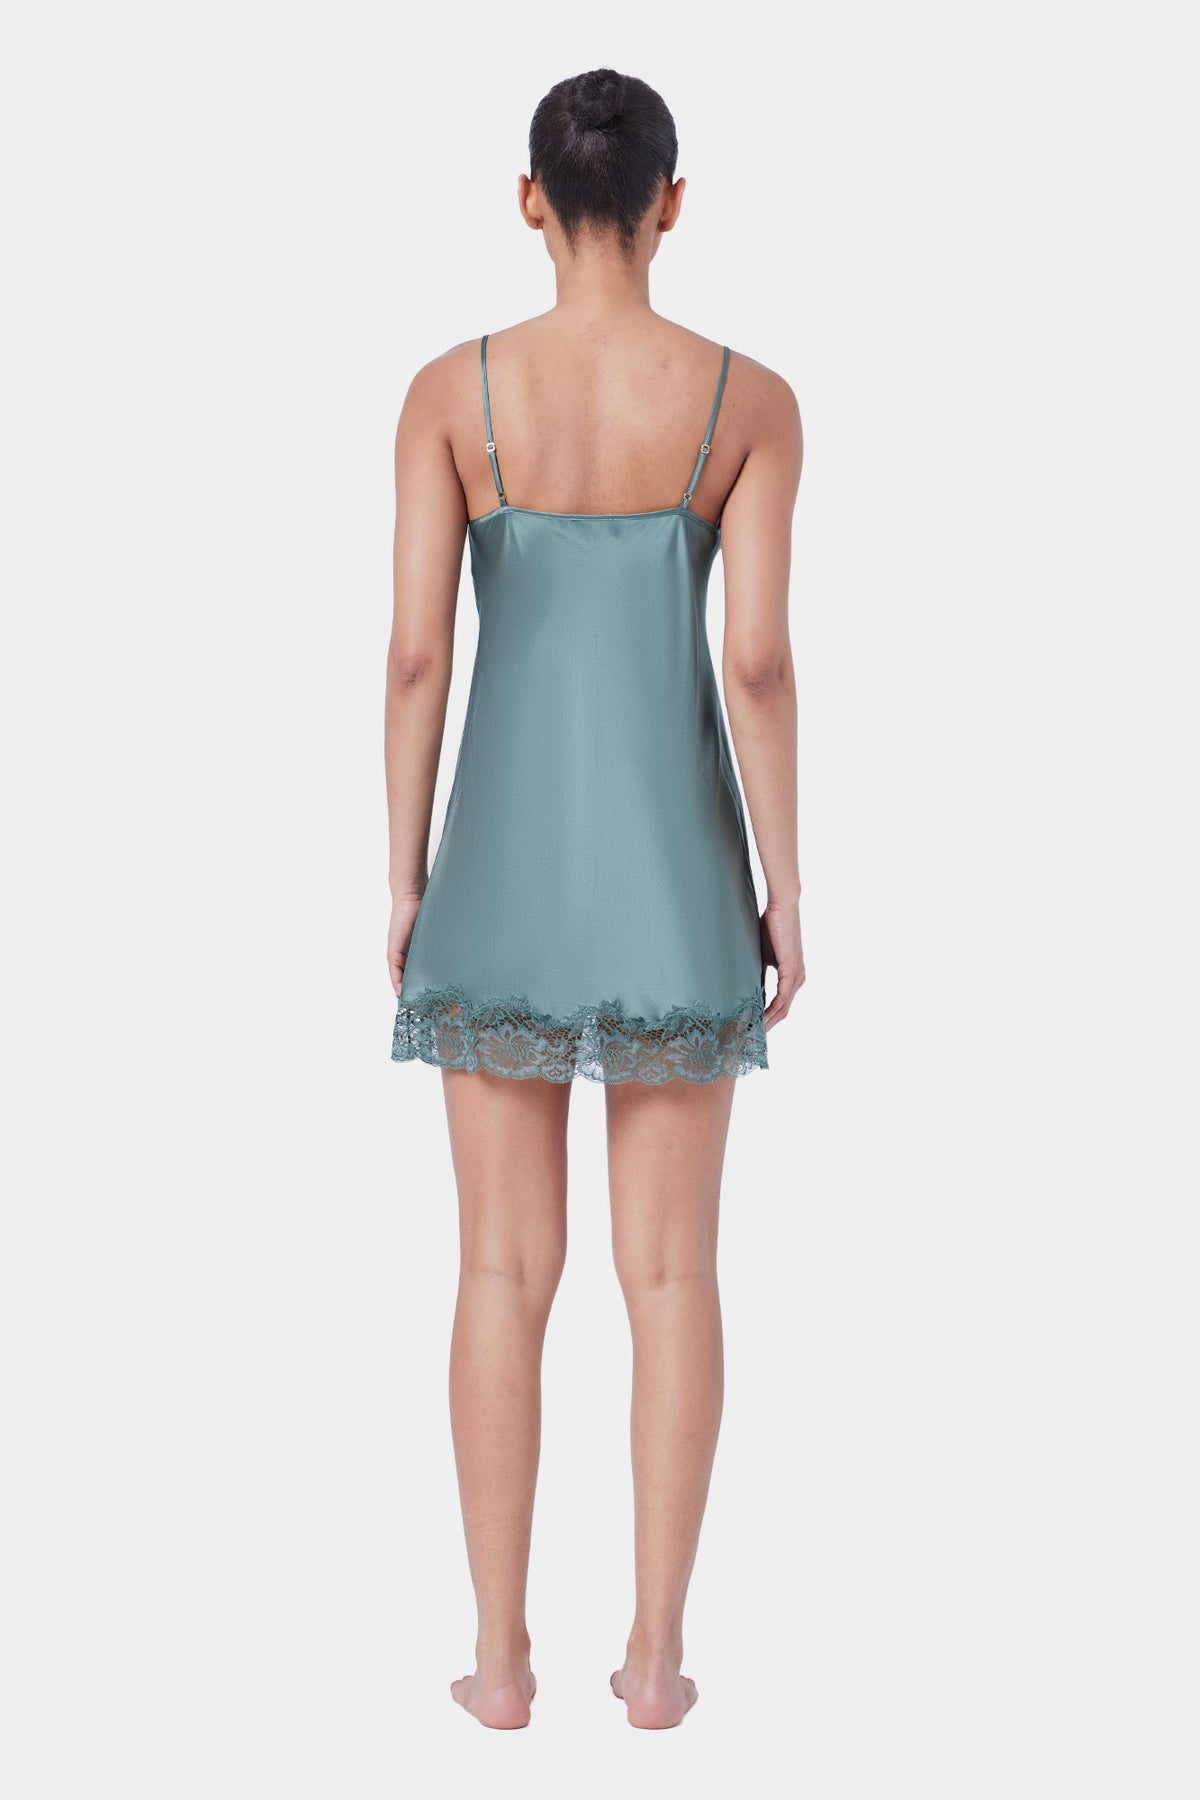 The Silk Lace Chemise By GINIA In Moss